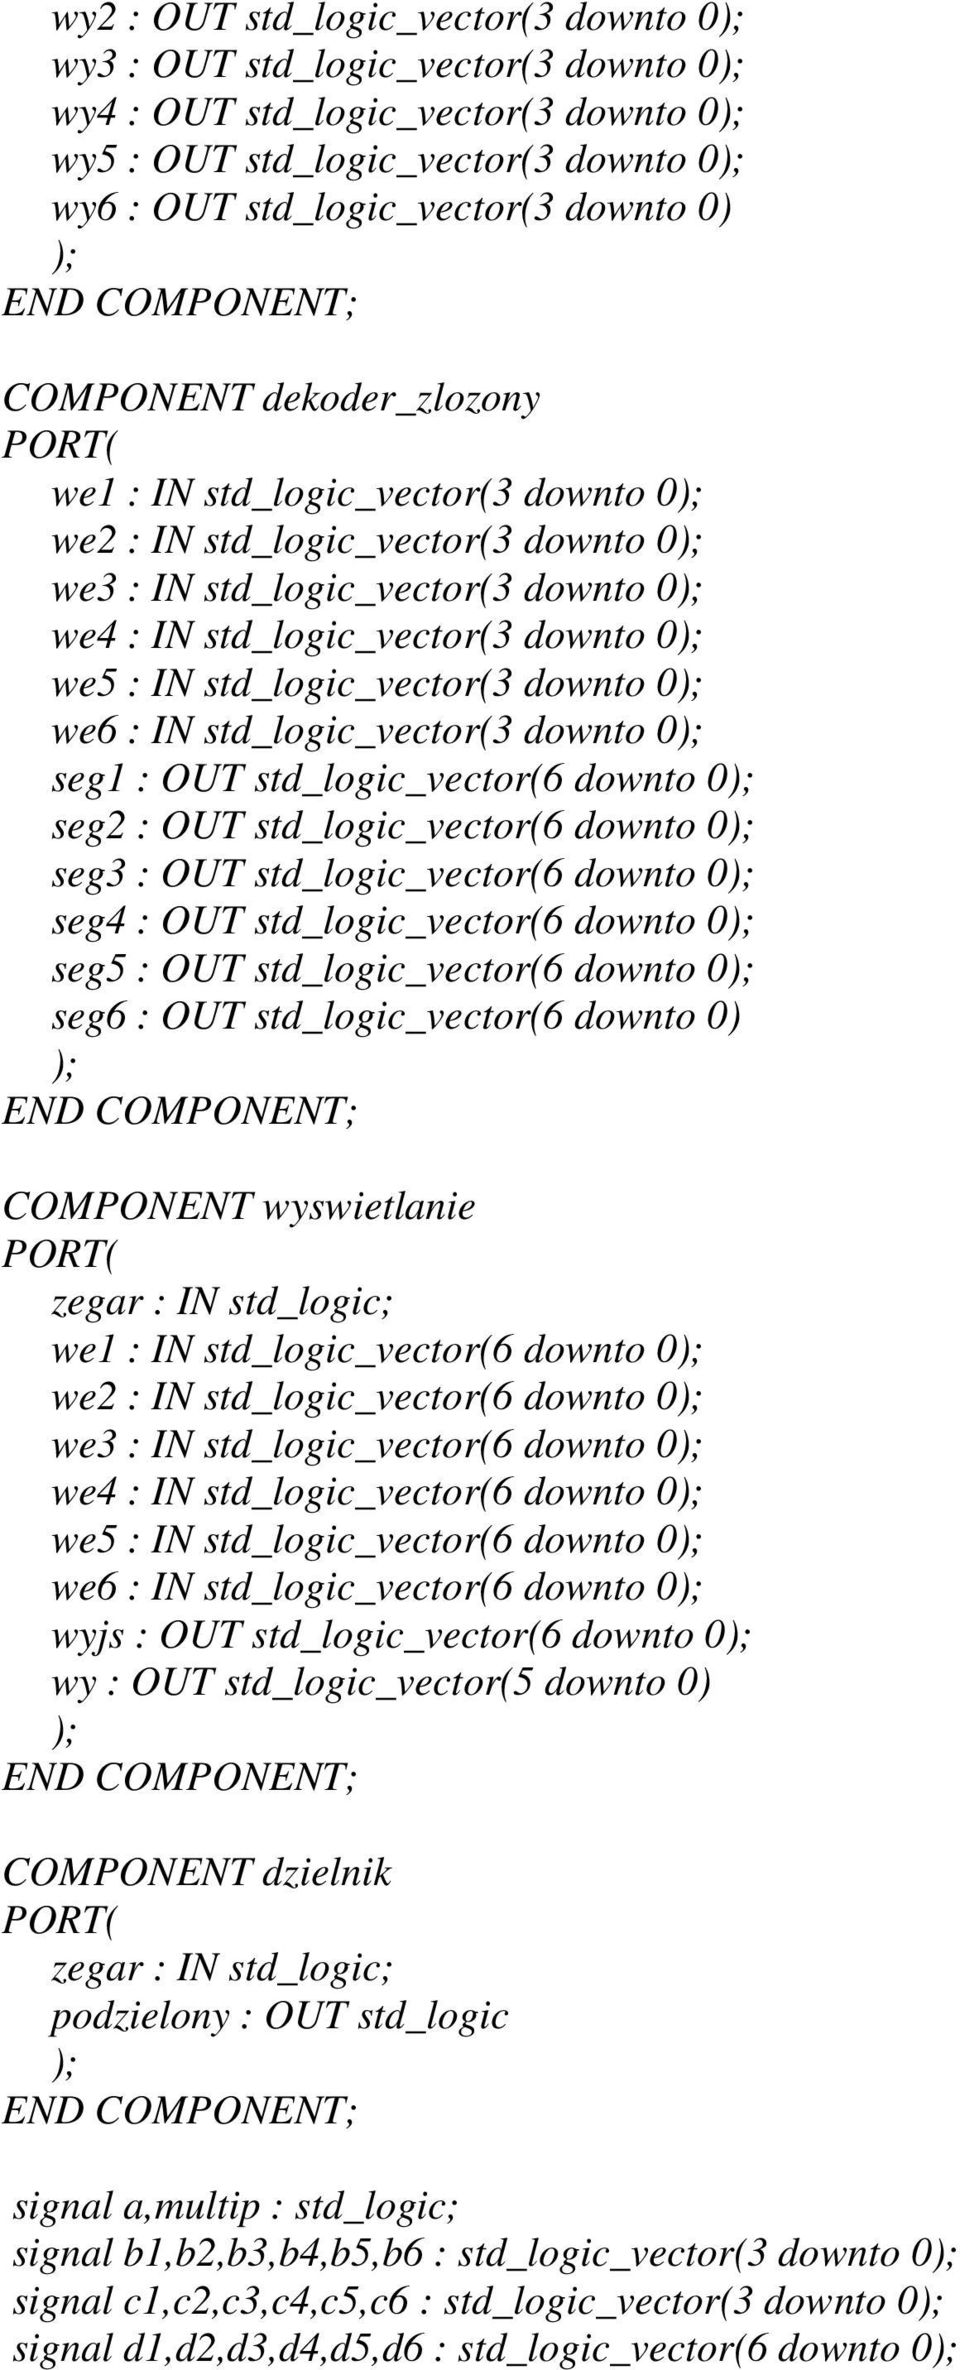 downto 0); we5 : IN std_logic_vector(3 downto 0); we6 : IN std_logic_vector(3 downto 0); seg1 : OUT std_logic_vector(6 downto 0); seg2 : OUT std_logic_vector(6 downto 0); seg3 : OUT